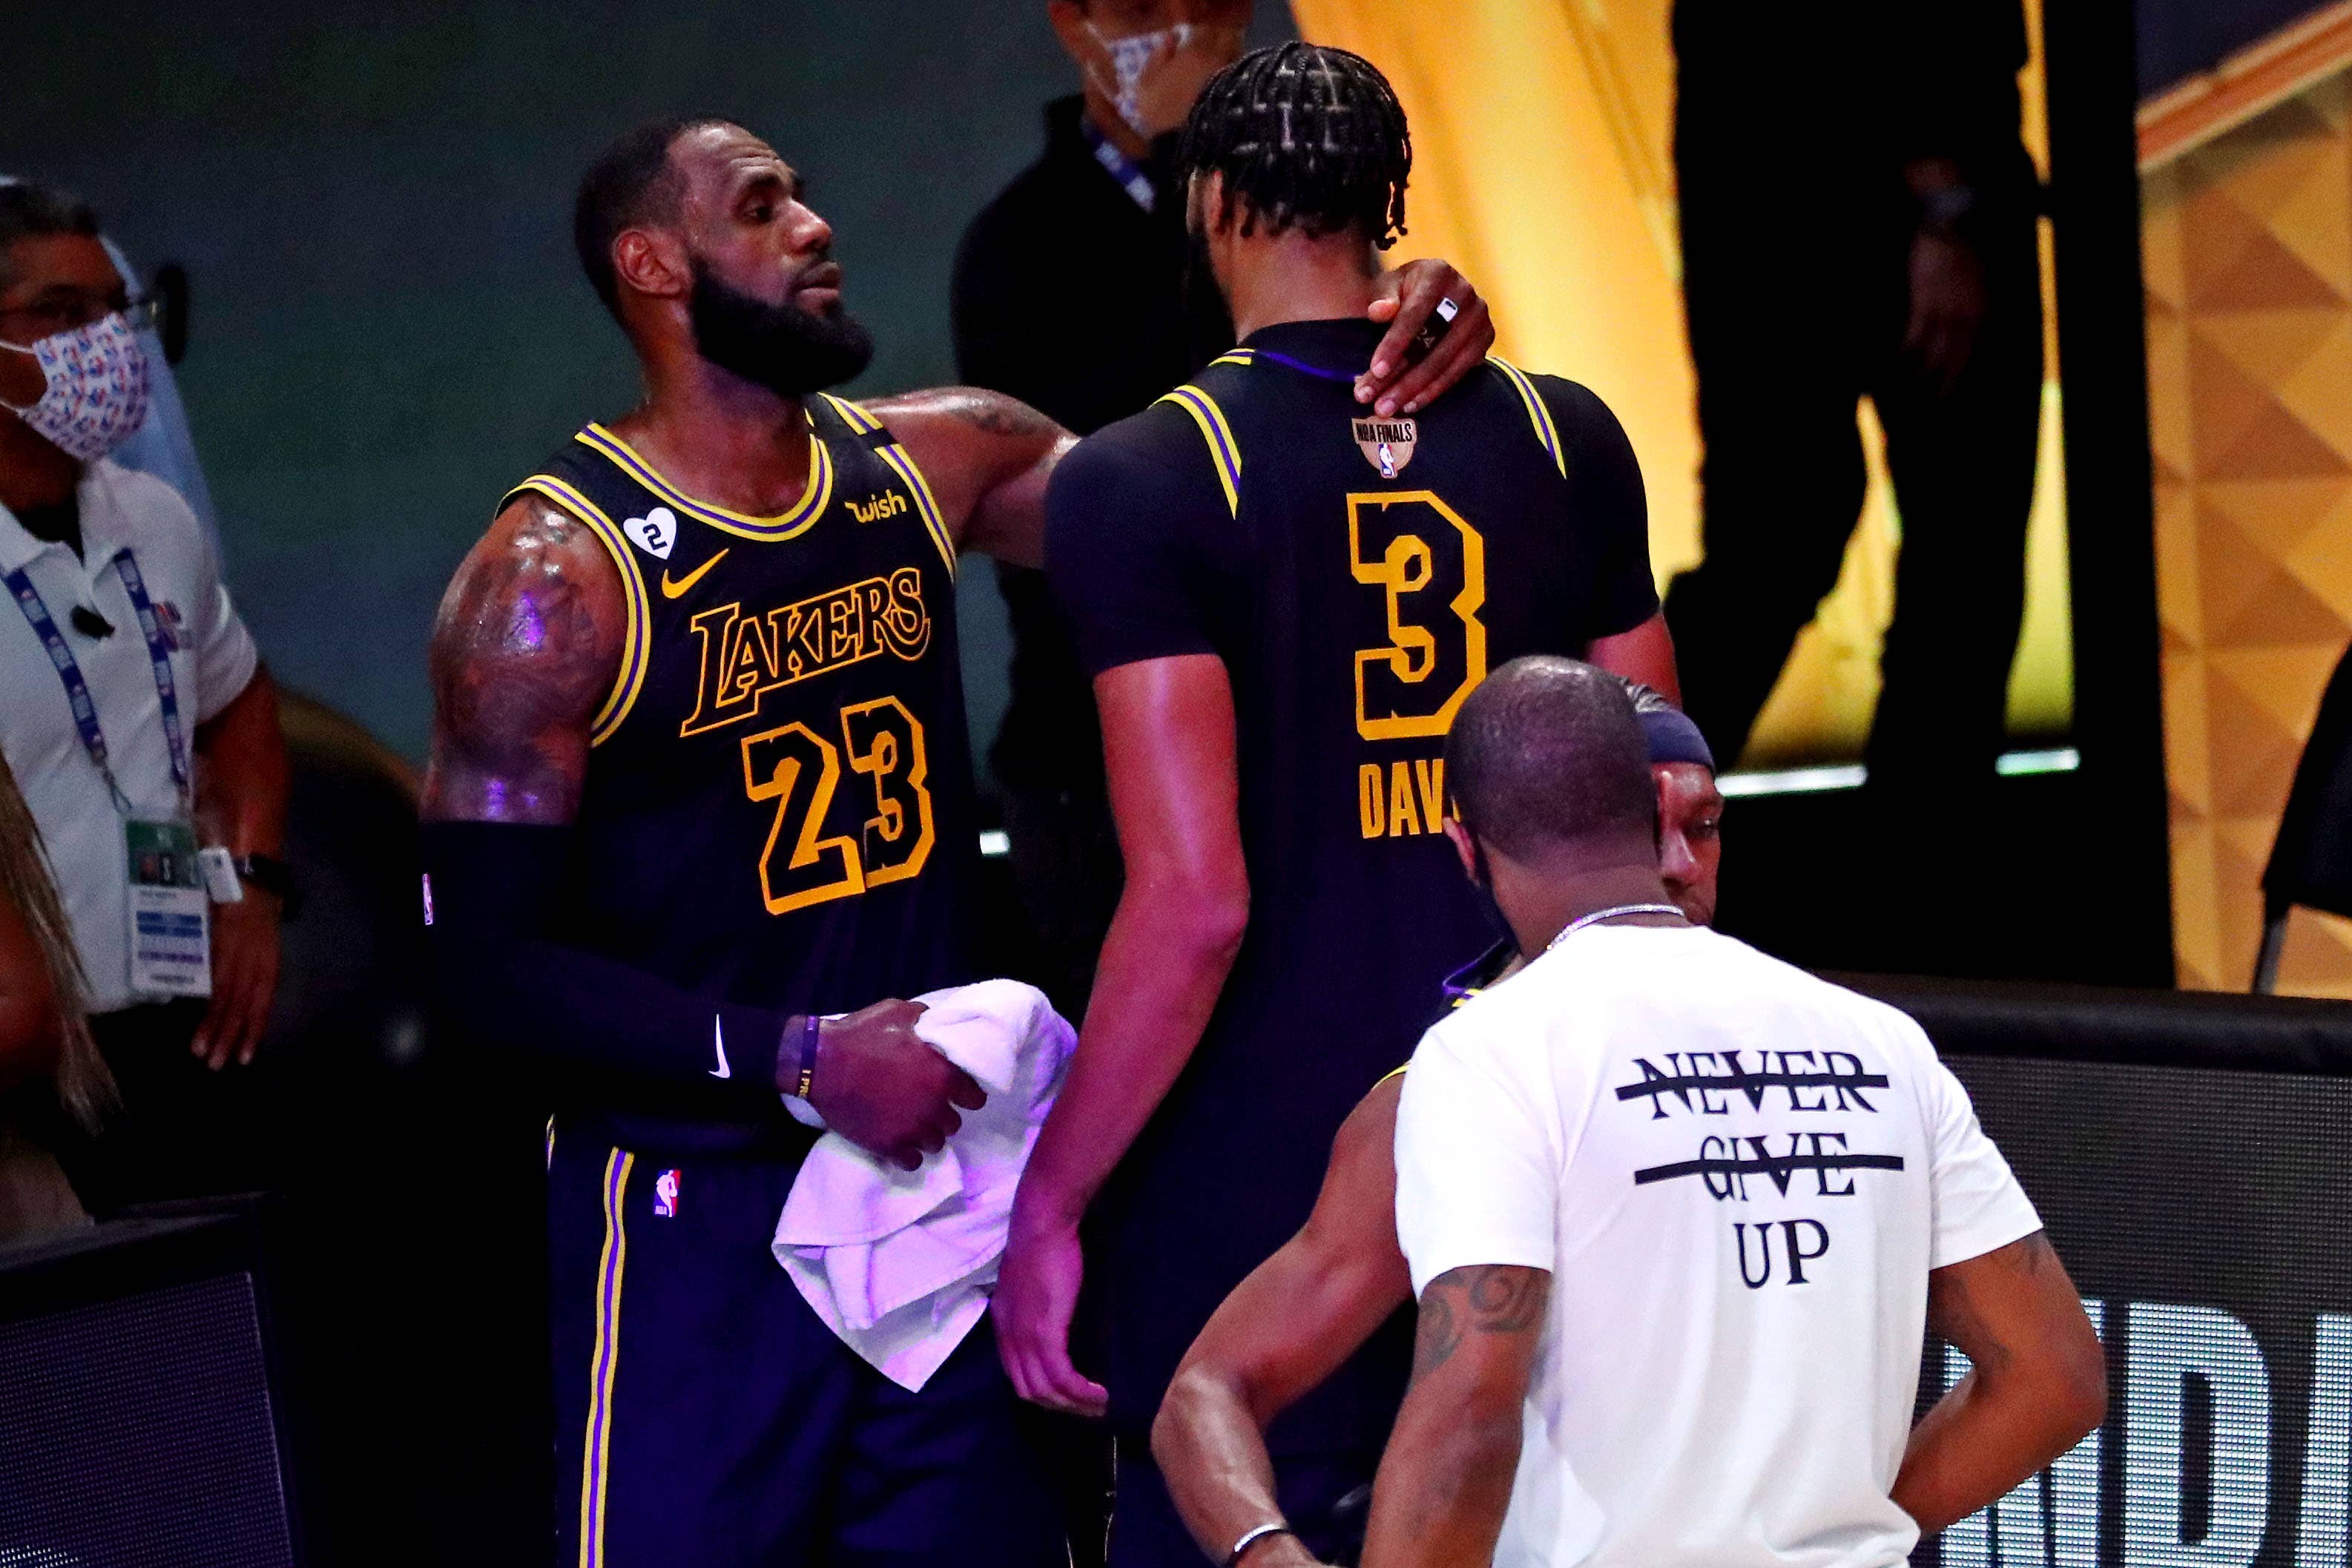 Lakers vs. Heat final score, results: Los Angeles wins 2020 NBA  championship in dominant Game 6